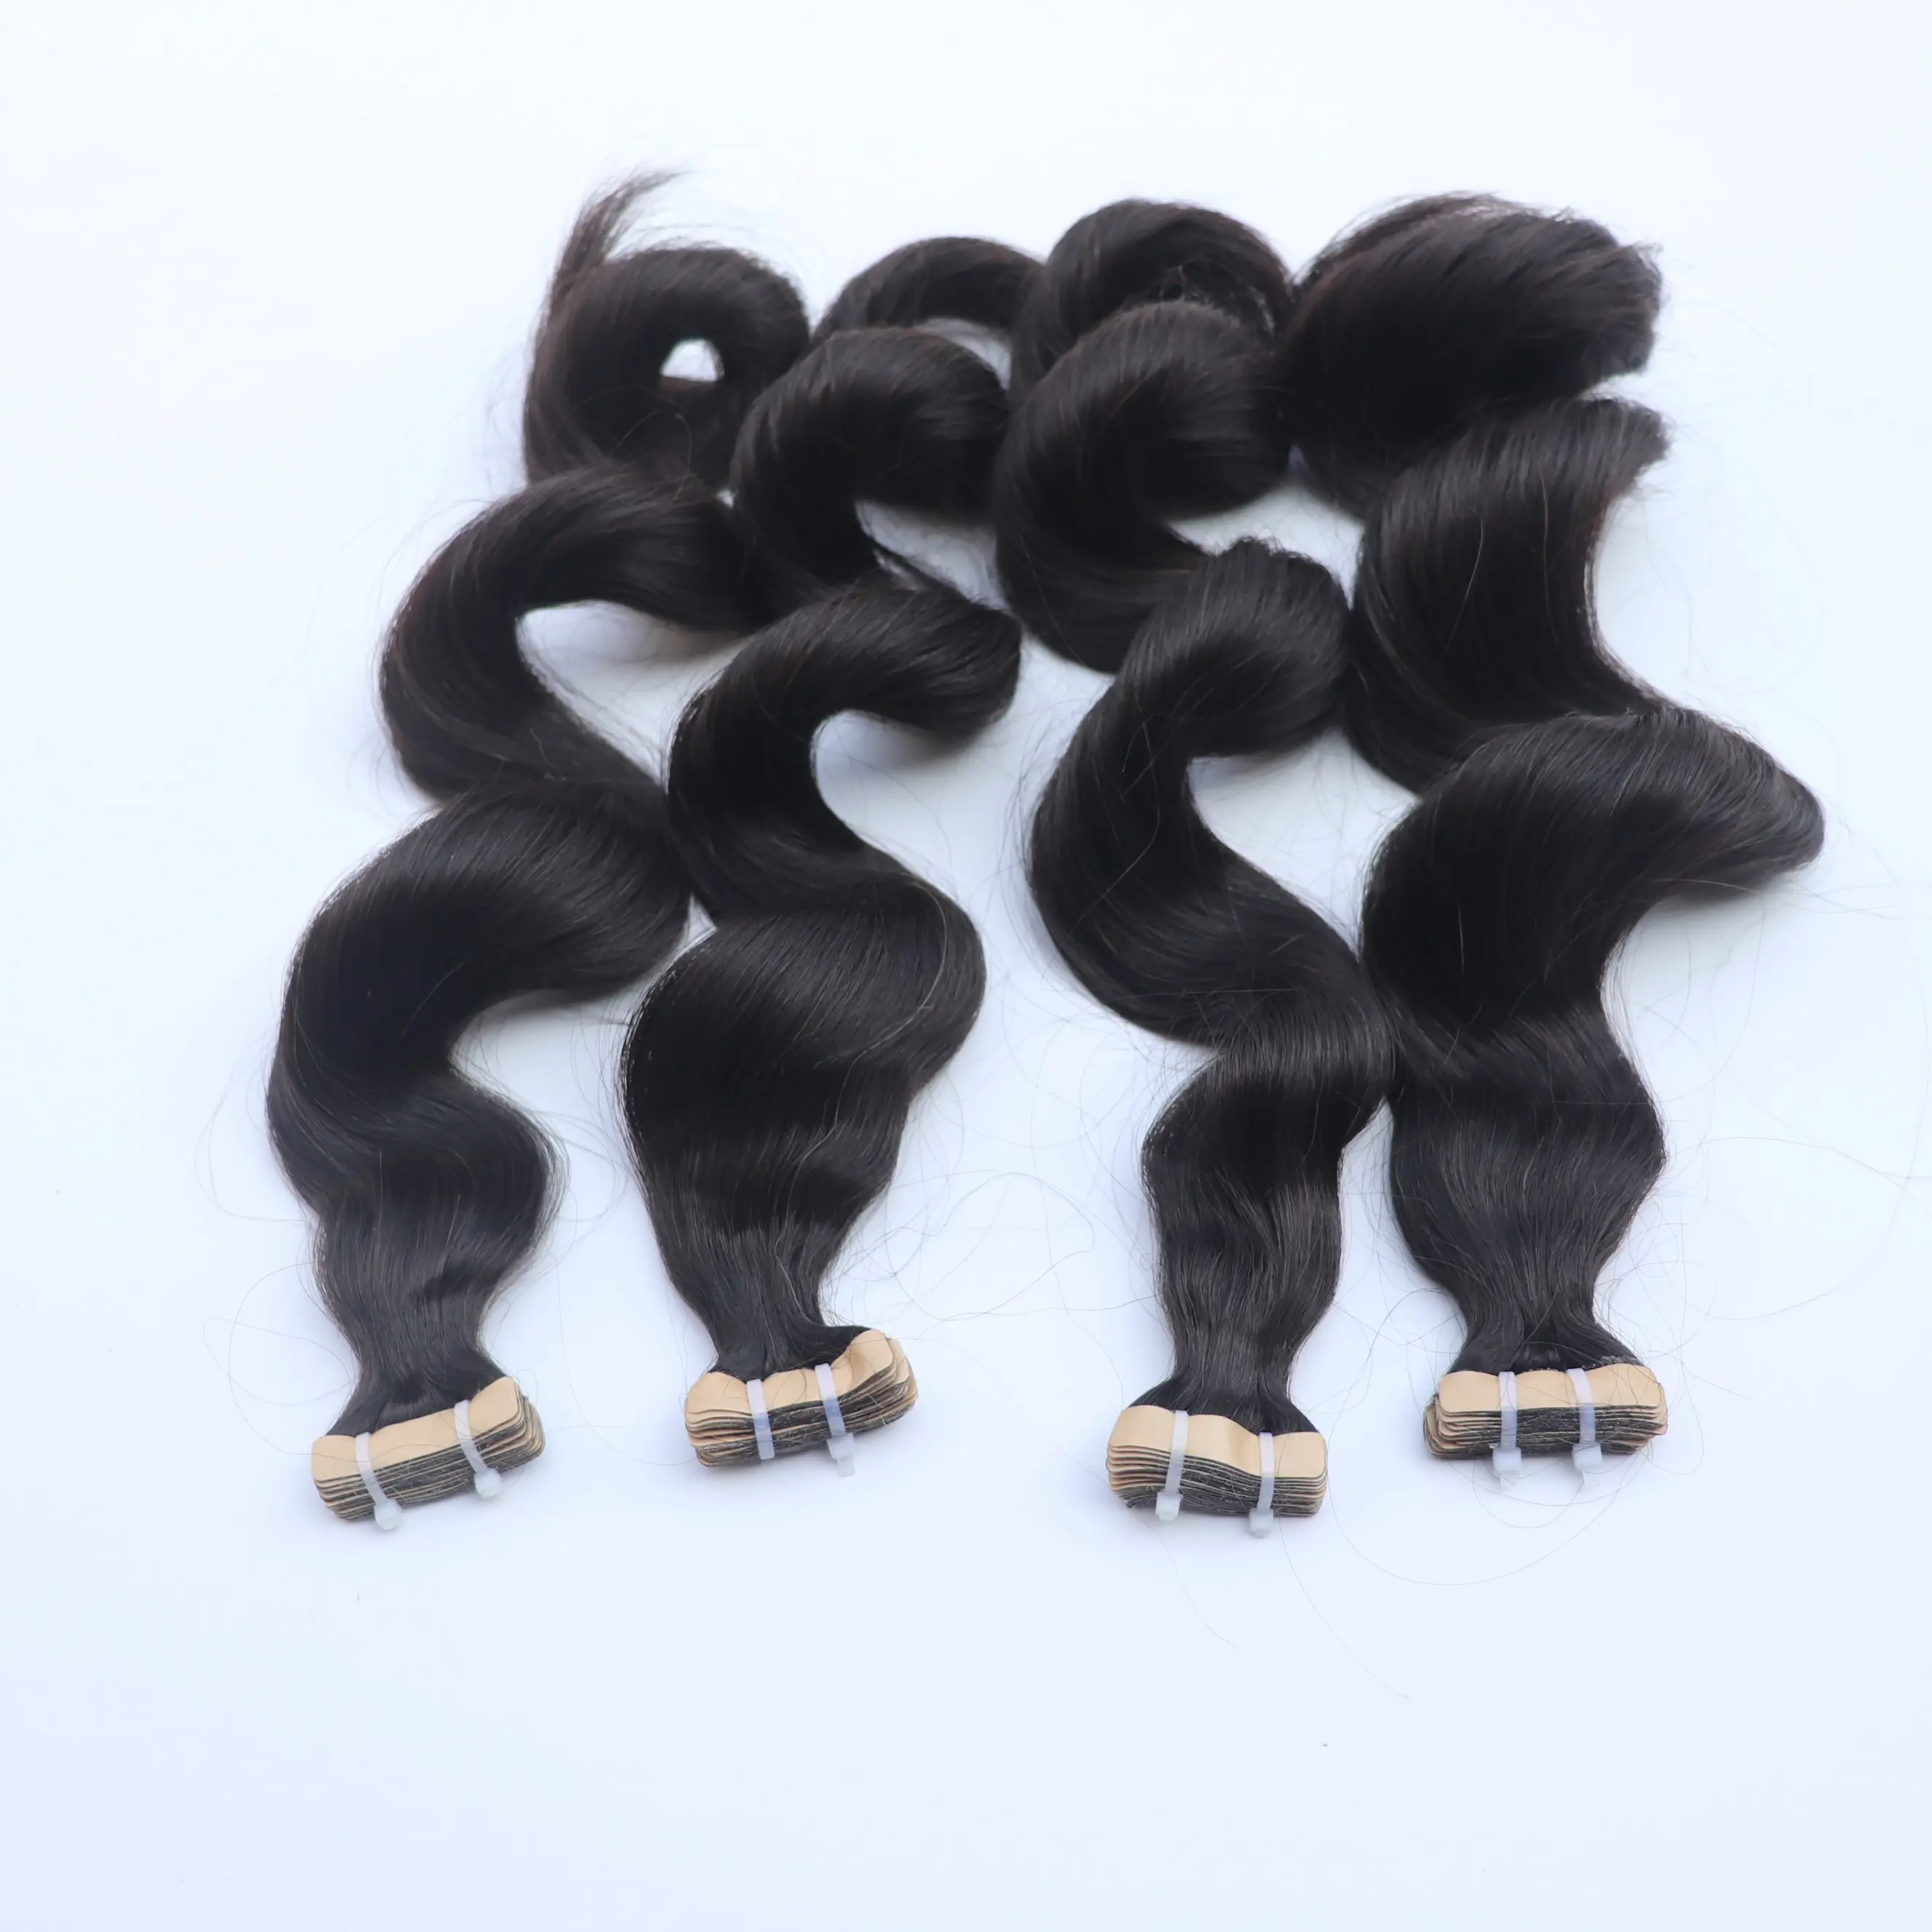 Wholesale Seamless Tape In Hair Extensions Curly Wavy Human Hair Black Color Raw Virgin Remy Hair